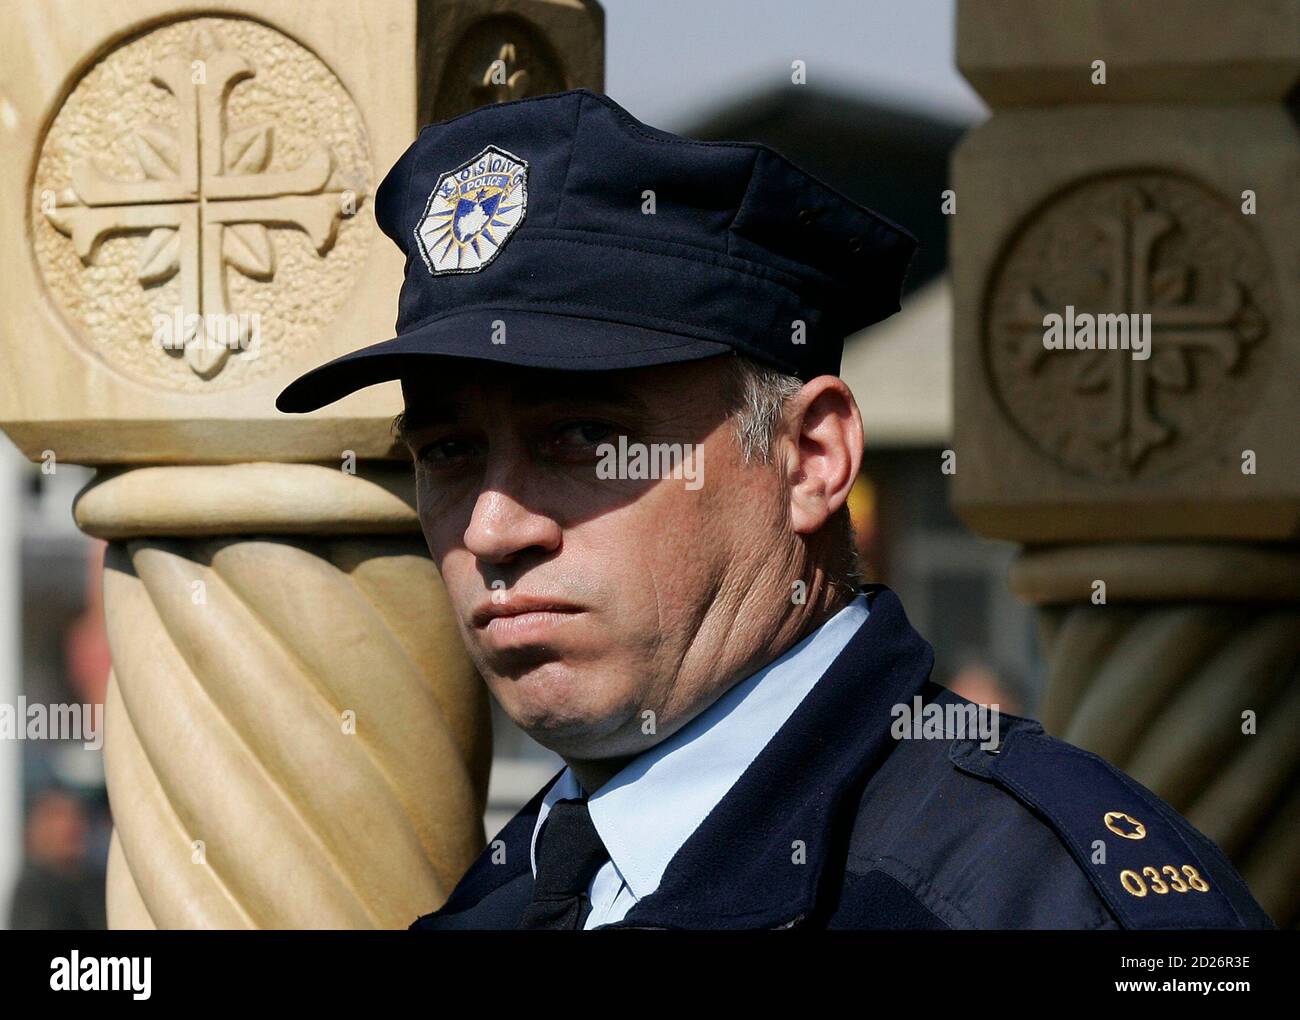 A Serbian police officer protests in the monastery village of Gracanica,  Kosovo February 29, 2008. Several hundred Kosovo Serb officers have  deserted the Kosovo police force since the new state declared independence